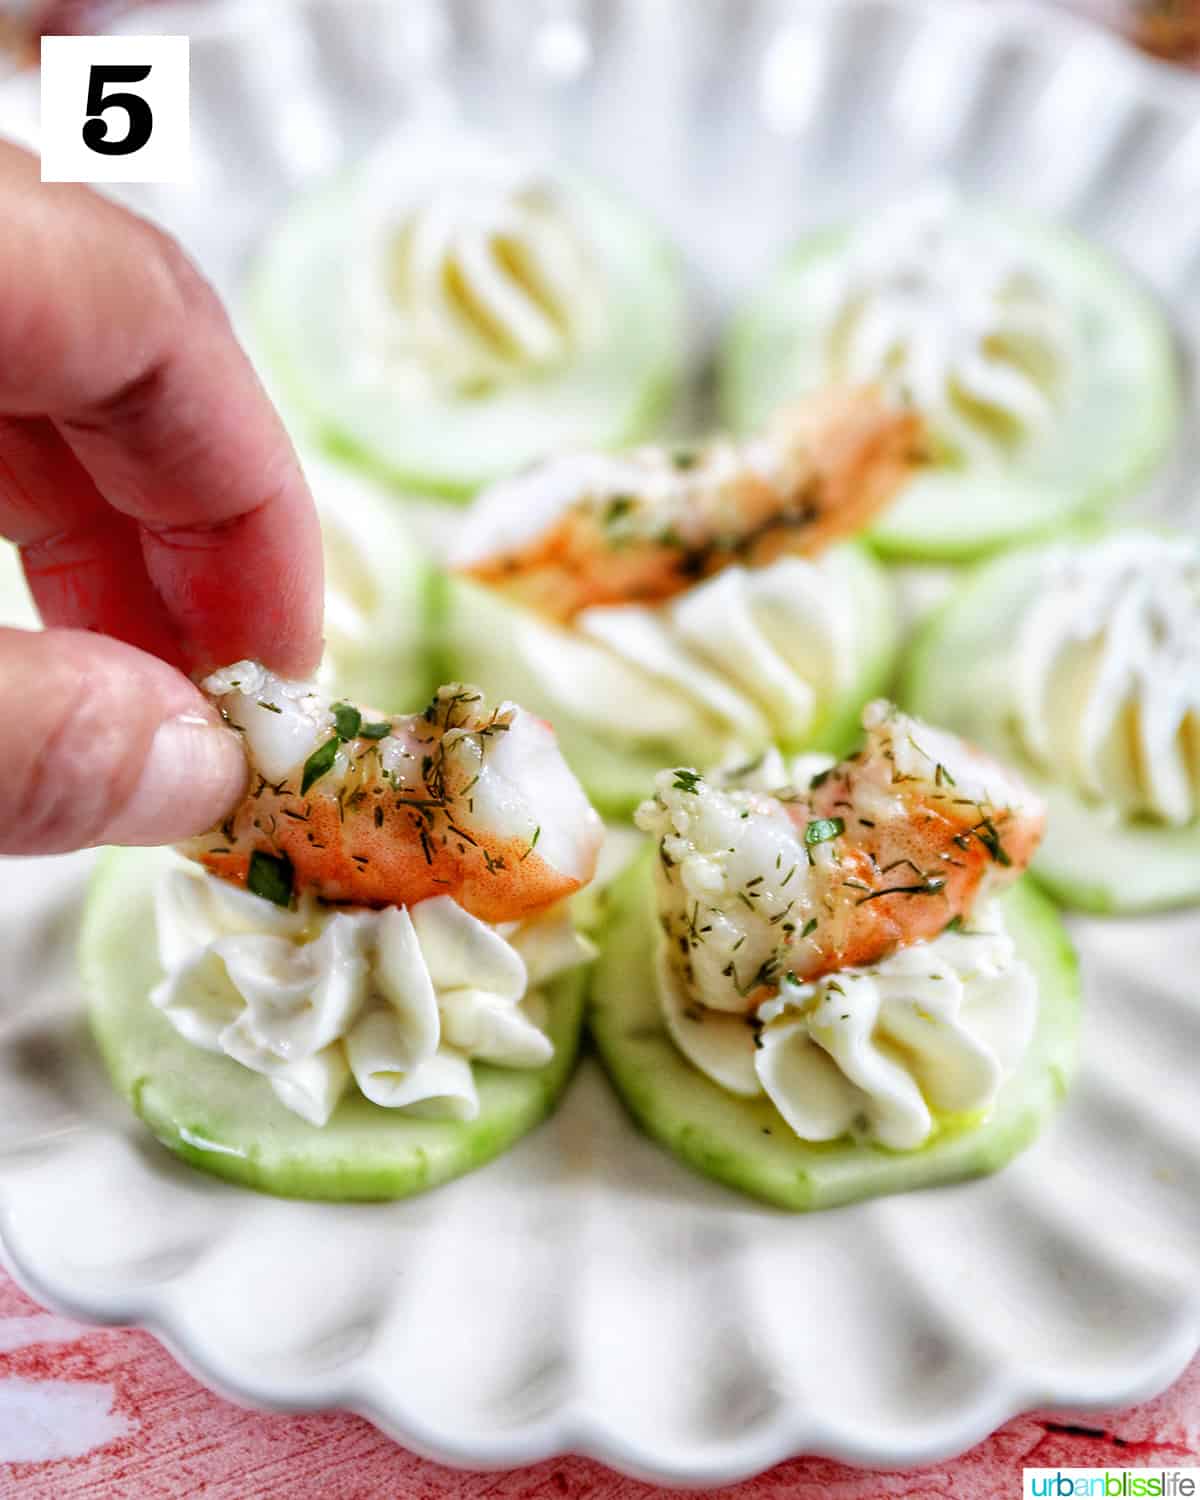 hand placing a shrimp on a cucumber cream cheese canapé appetizer on a scalloped plate.